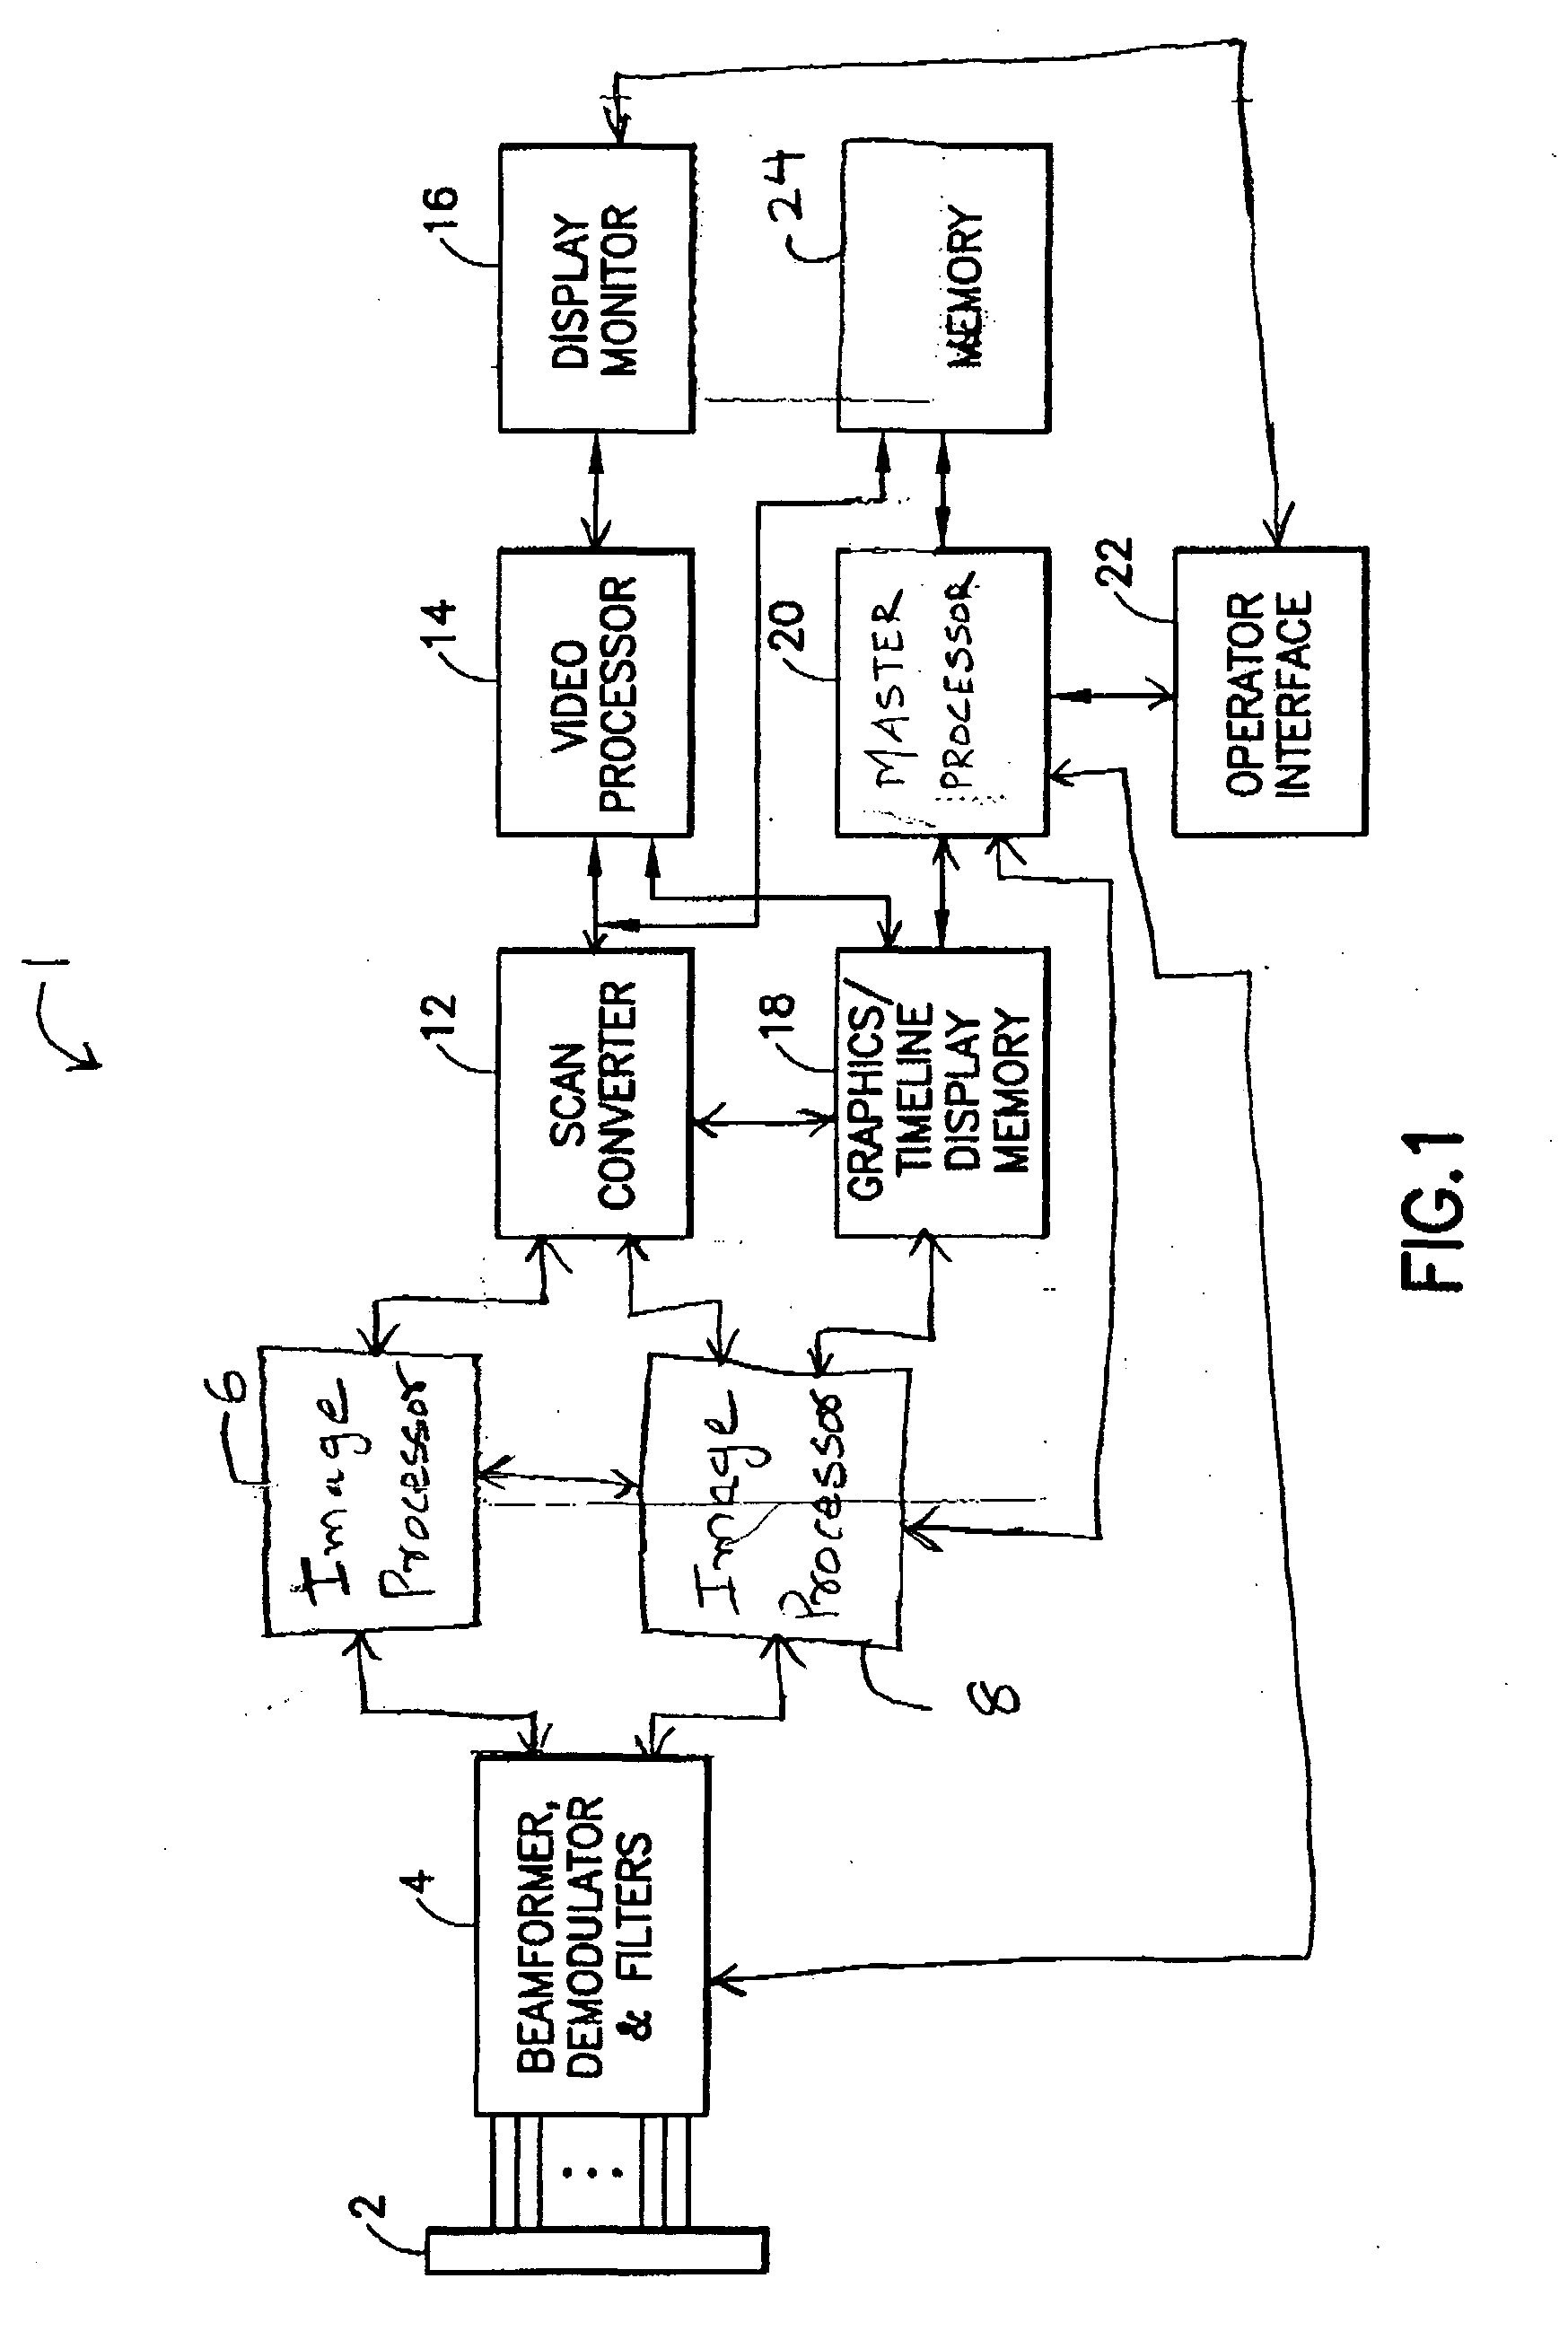 Systems and methods for acquiring images simultaneously